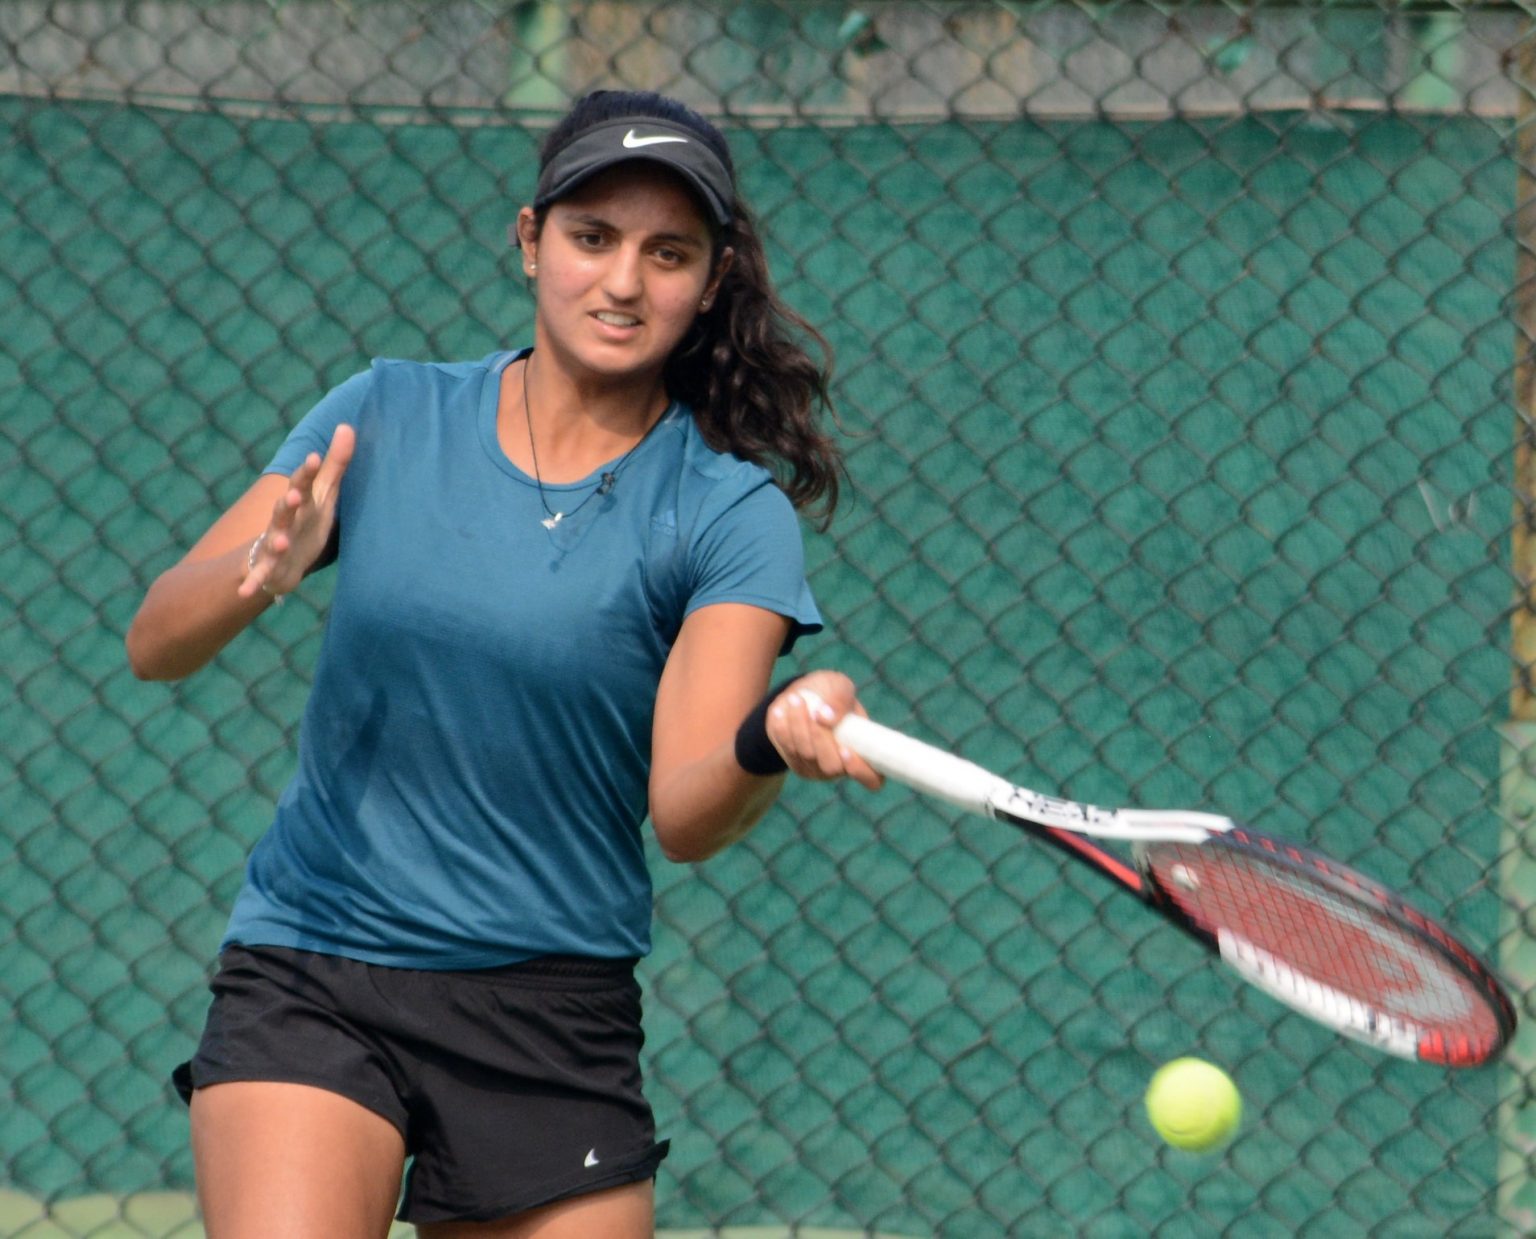 Who are the stars of Indian tennis?